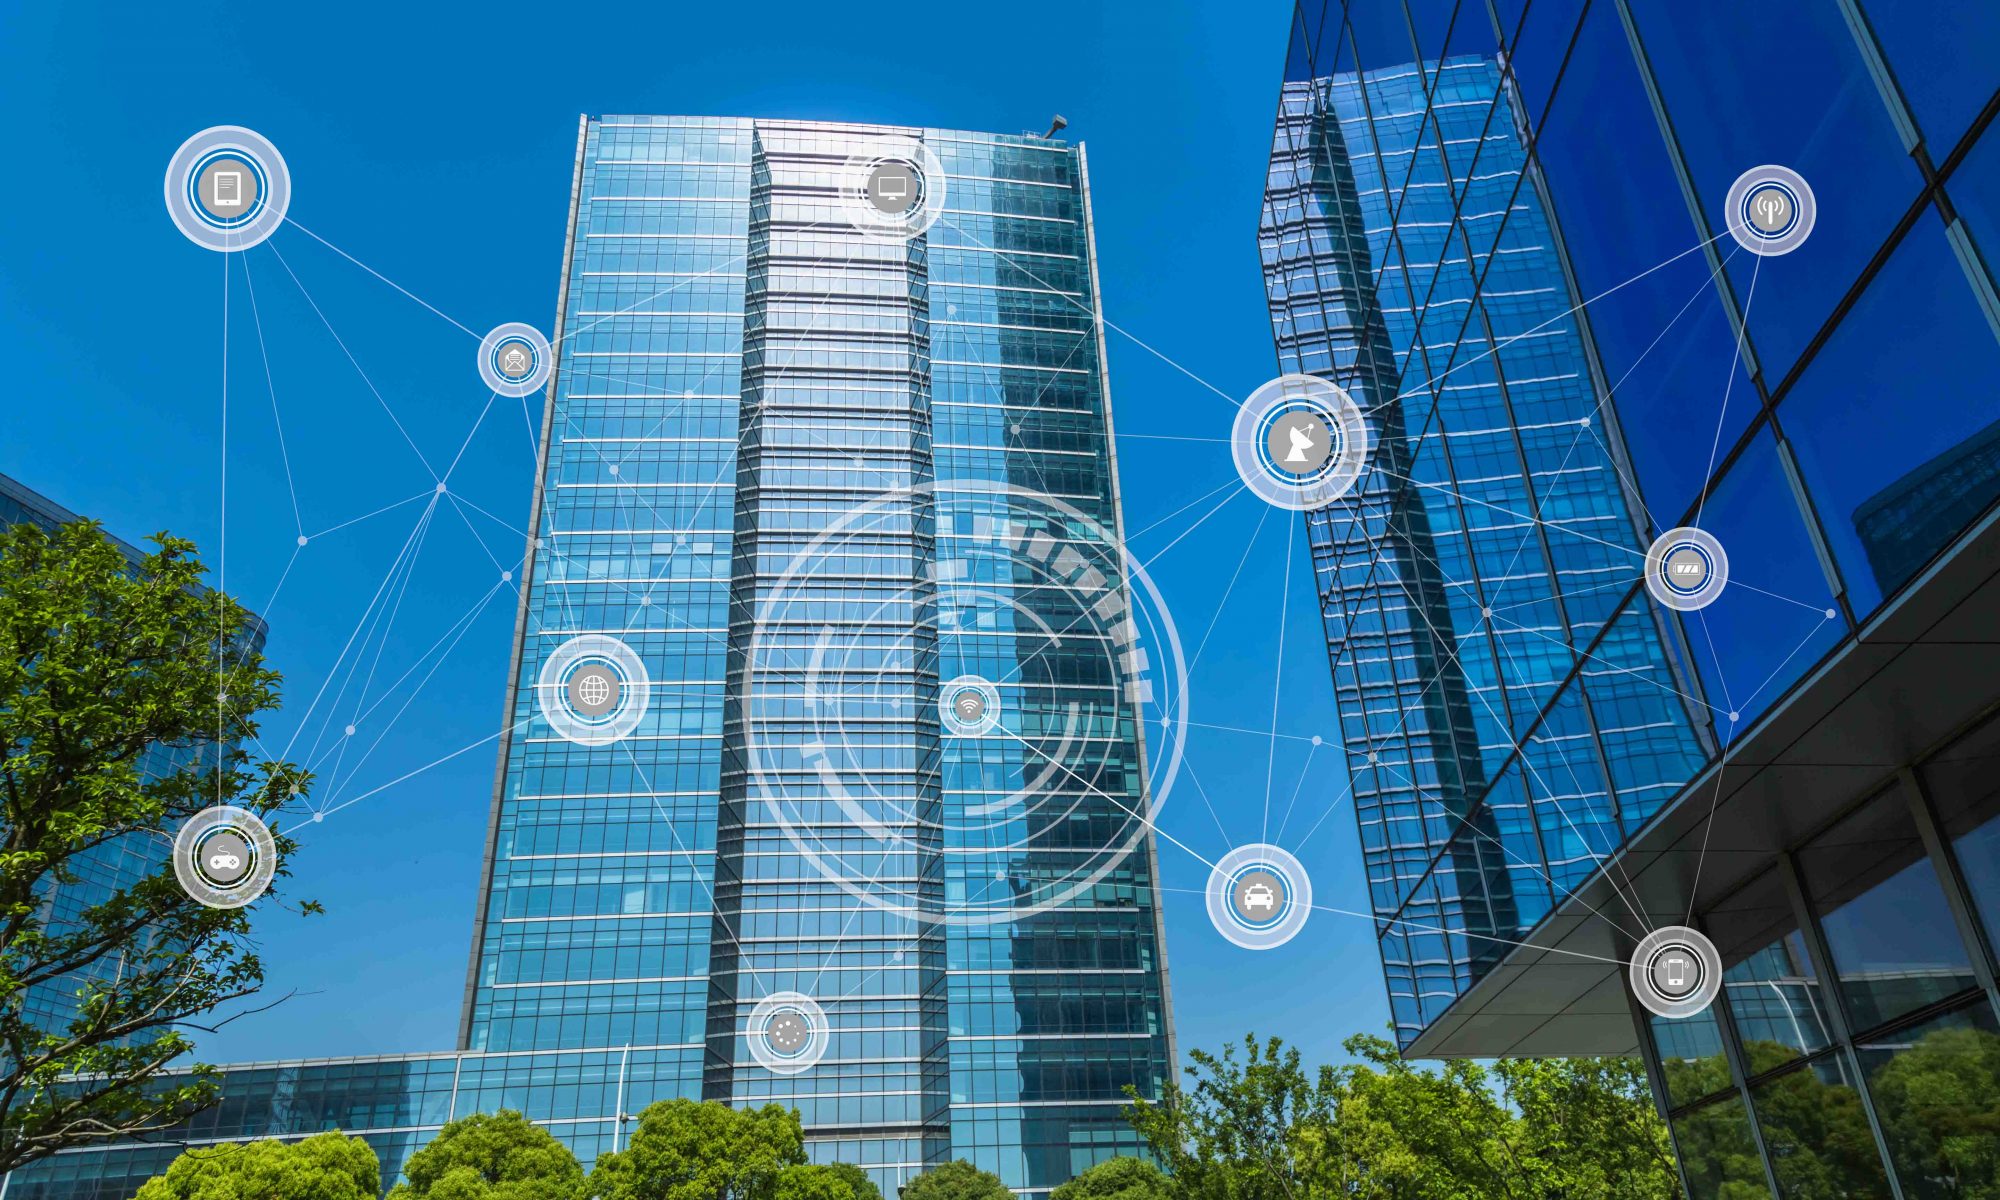 IoT for smart buildings